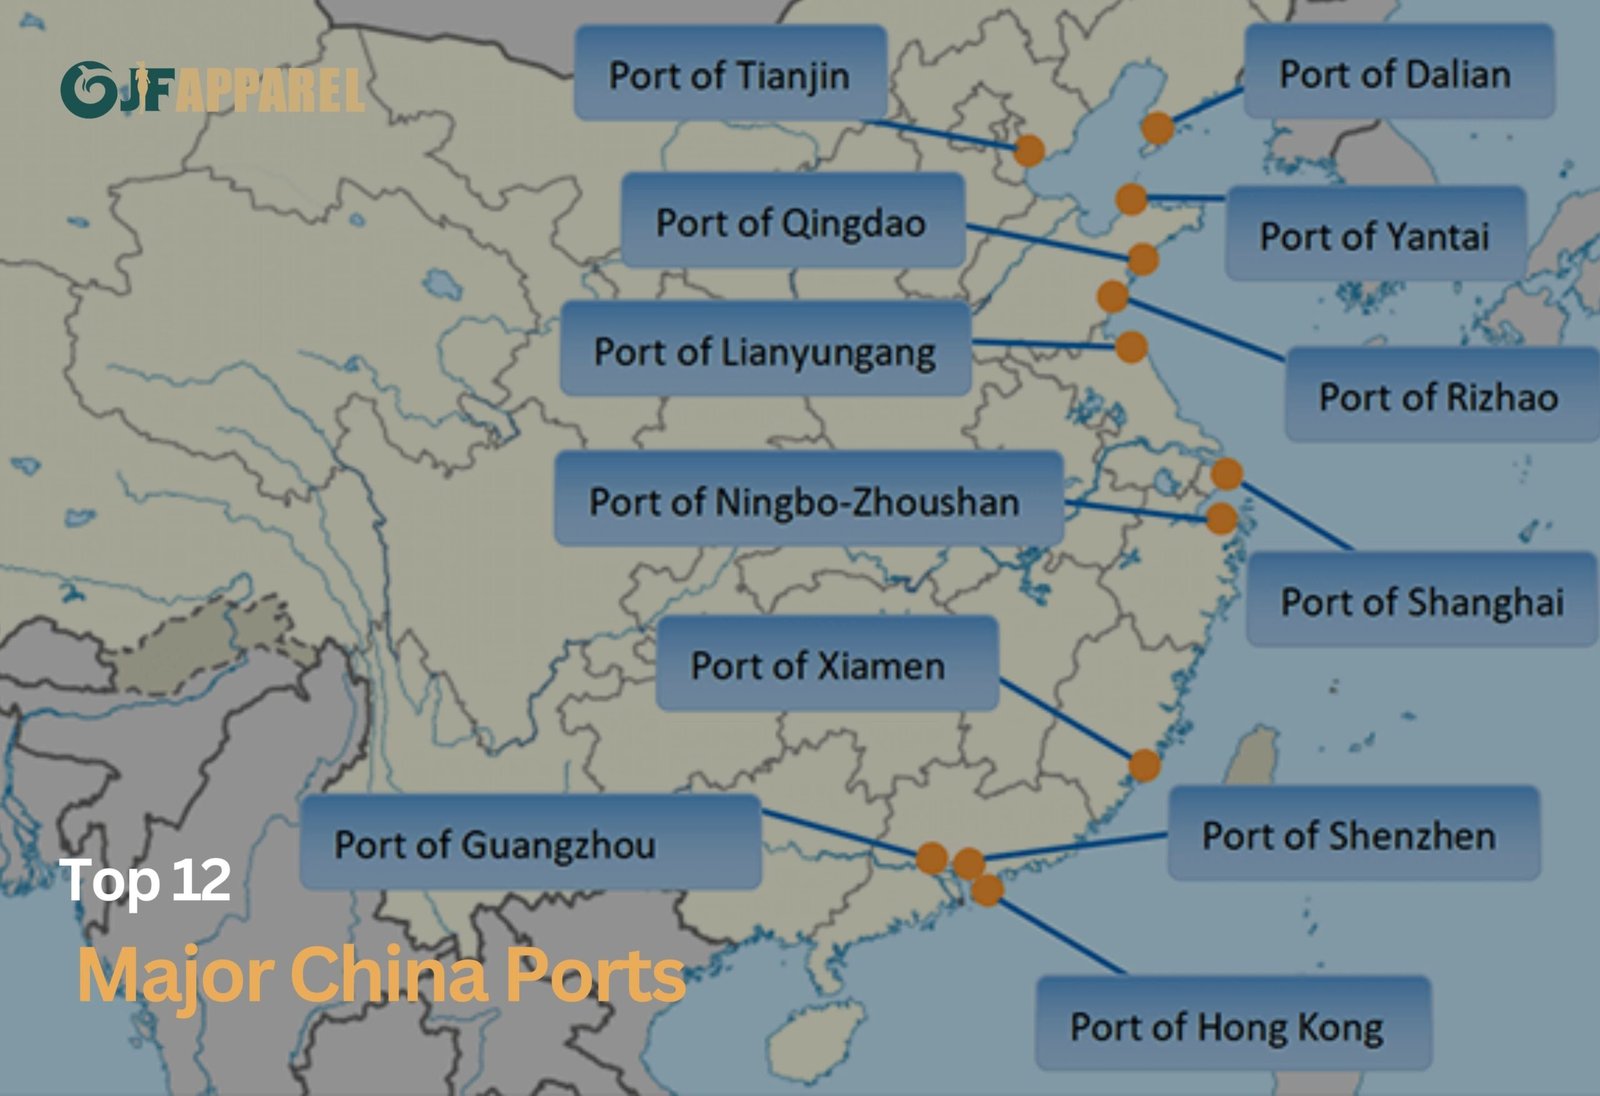 Top 12 Major China Ports - Key Gateways for Trade and Commerce